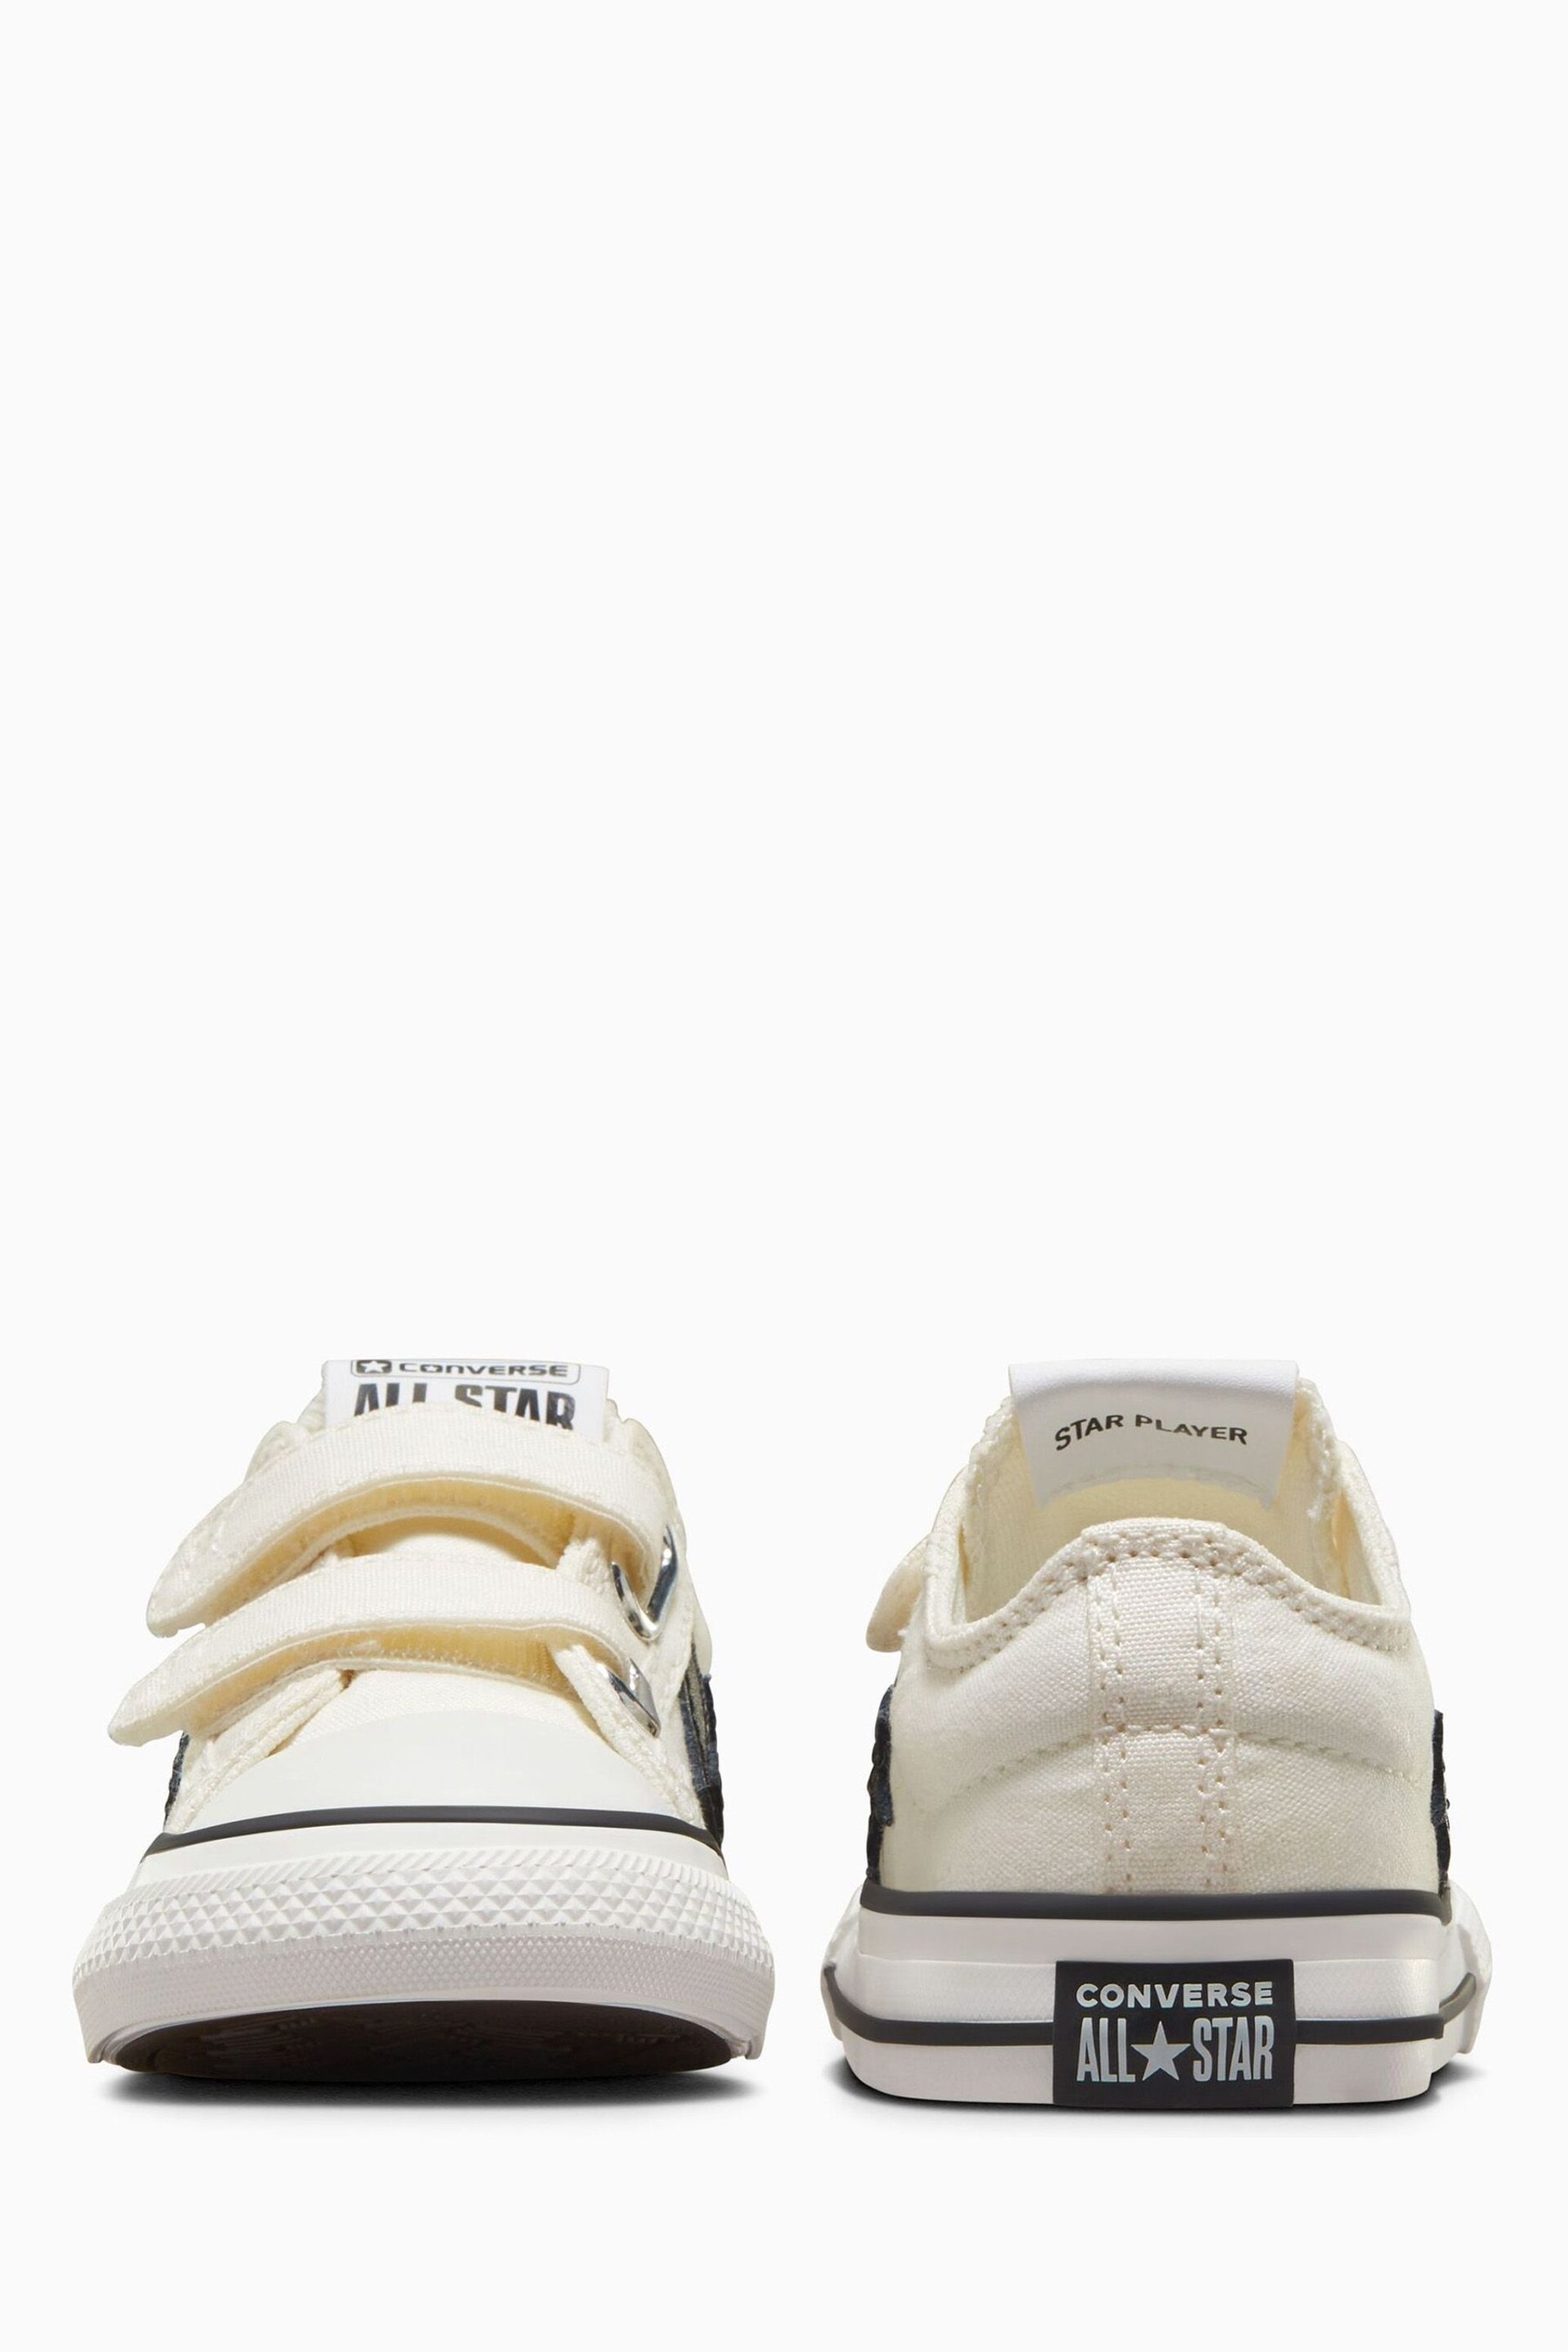 Converse White Infant Star Player 76 2V Easy On Trainers - Image 4 of 9